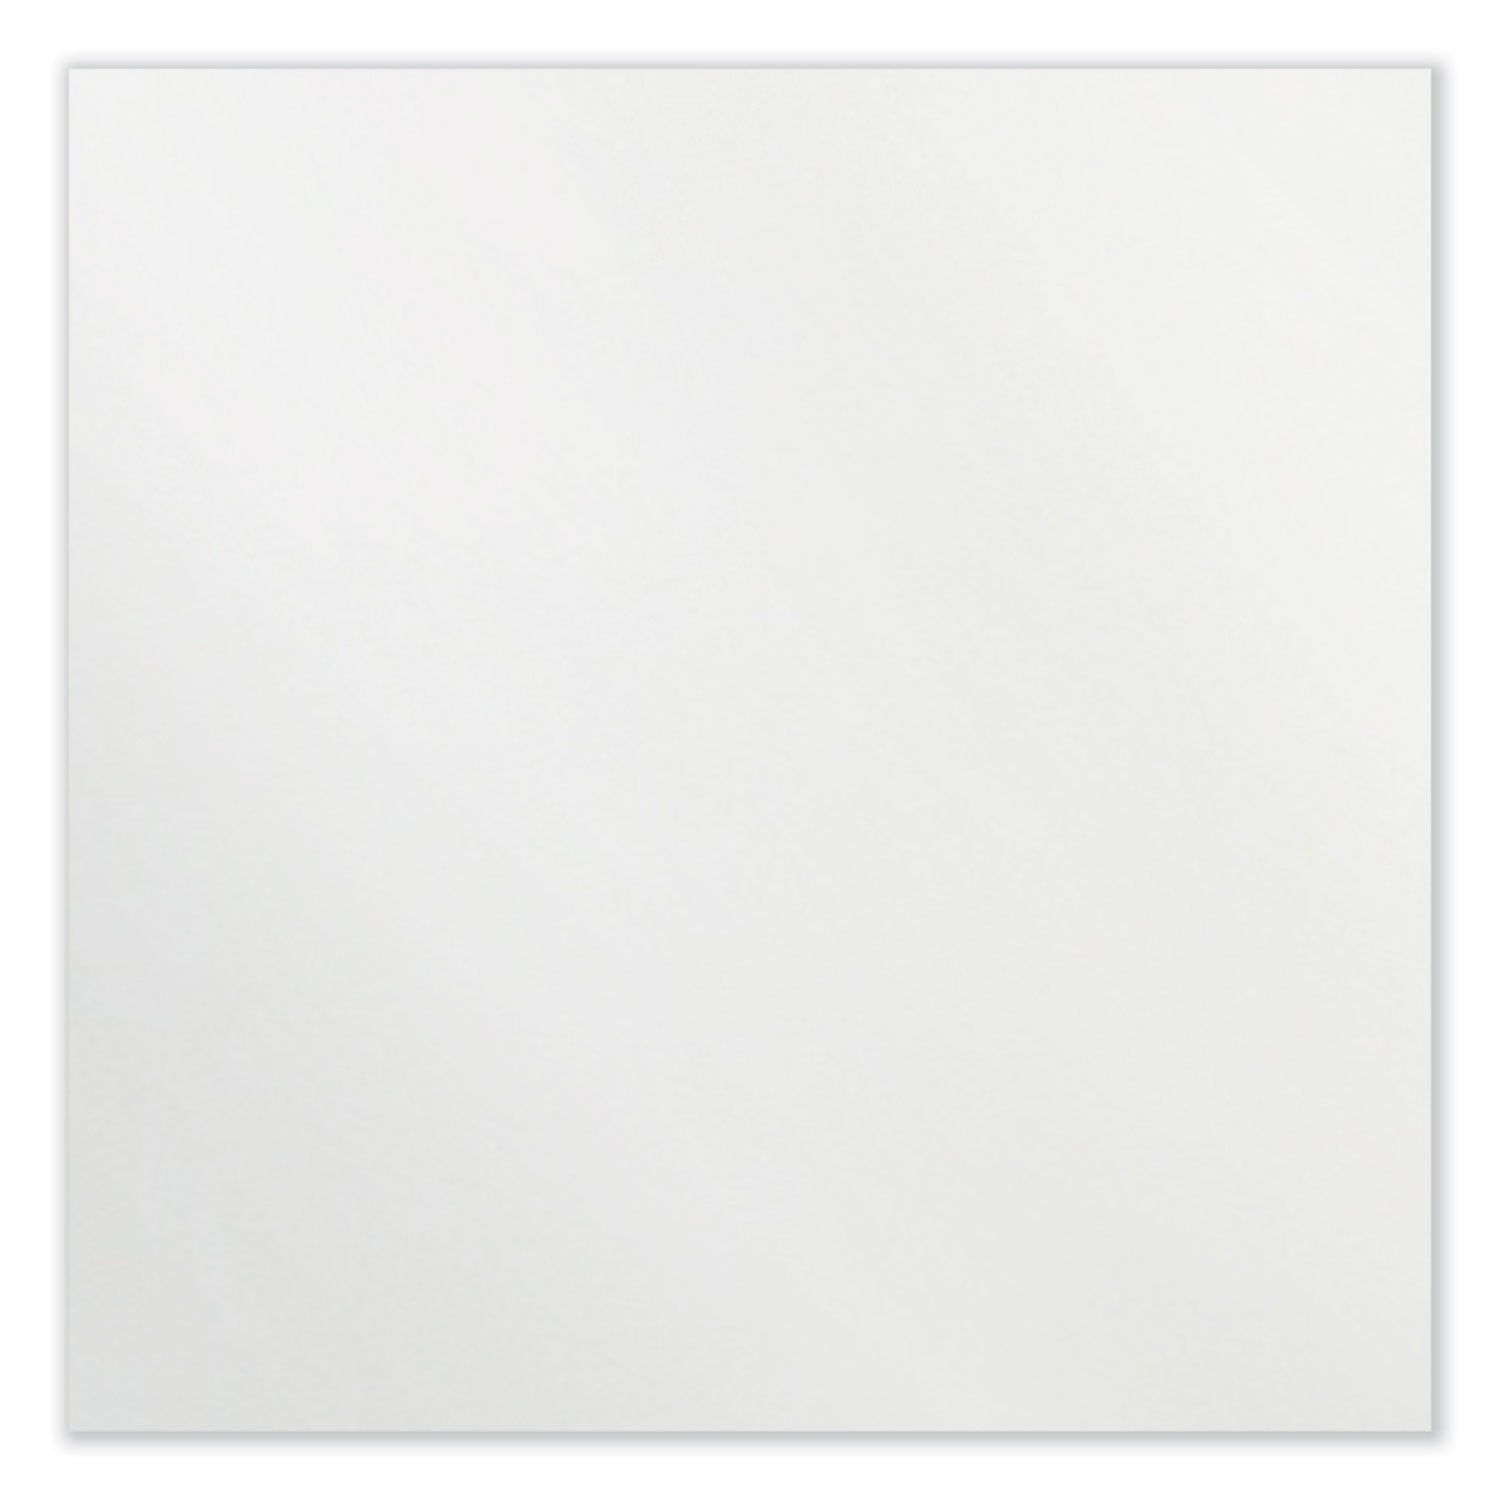 coda-low-profile-circular-magnetic-glassboard-24-diameter-white-surface-ships-in-7-10-business-days_ghecdagm24wh - 3